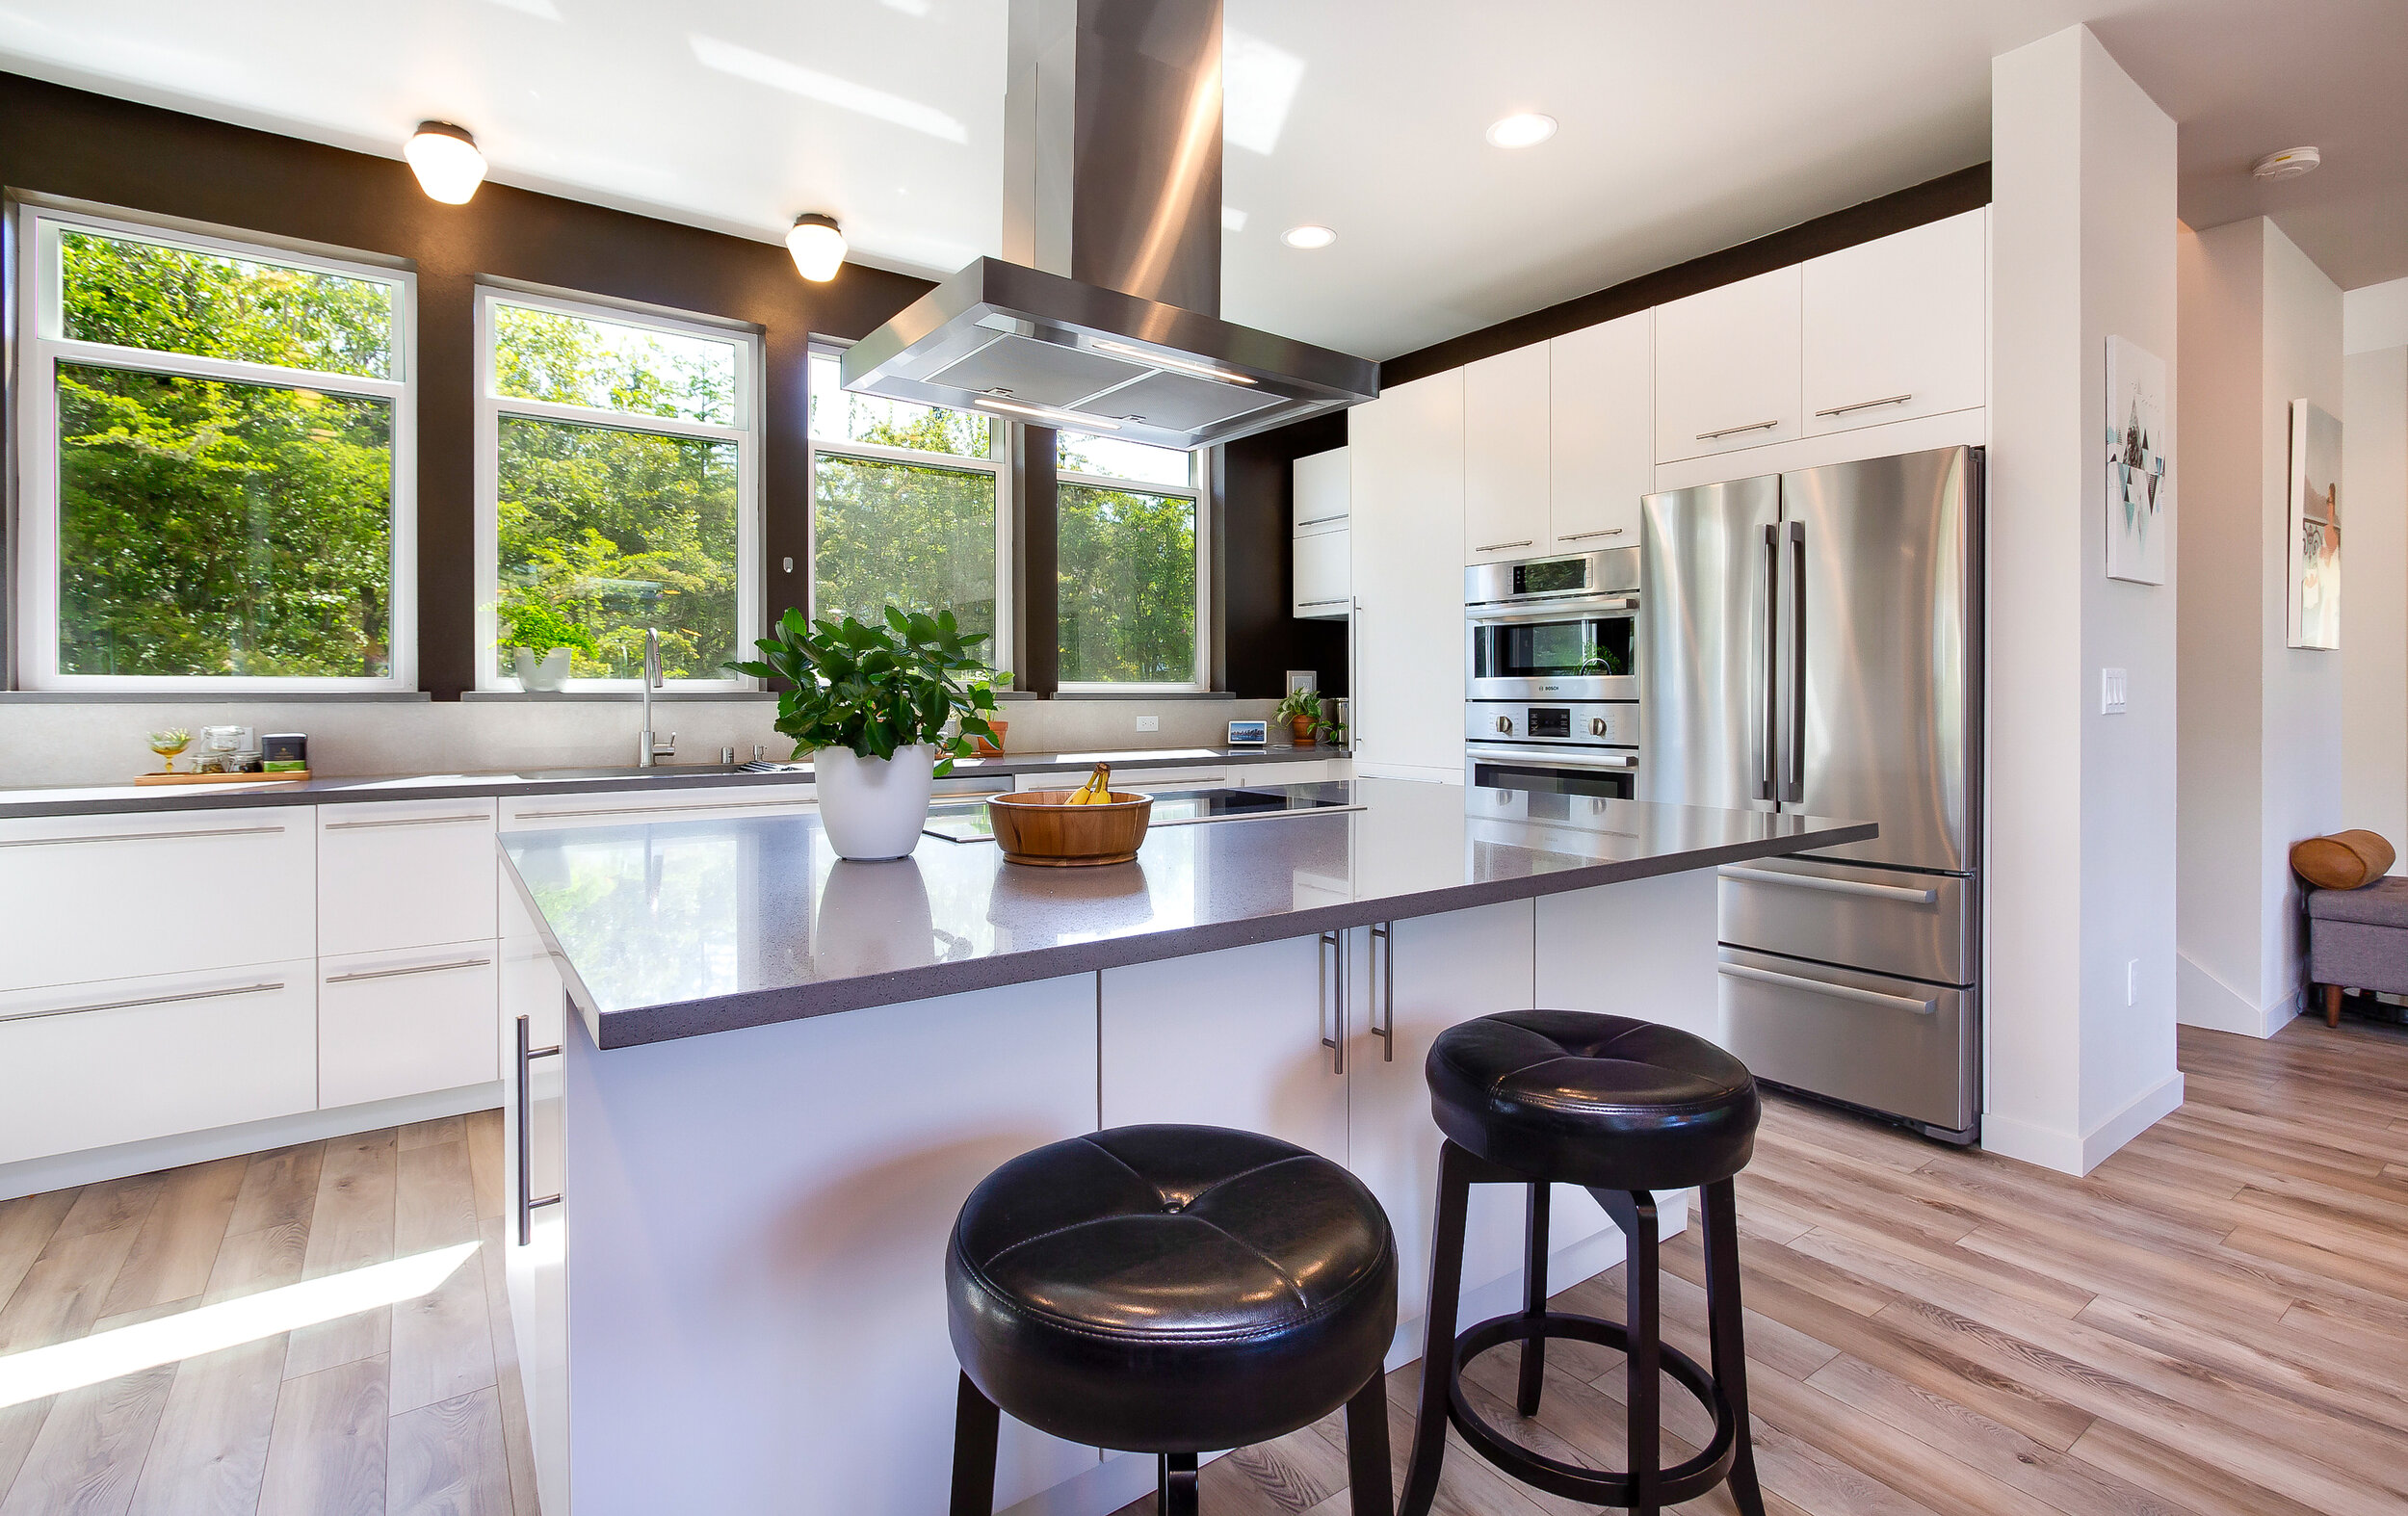 Located at the heart of the home, this light and bright kitchen is fit for entertaining!